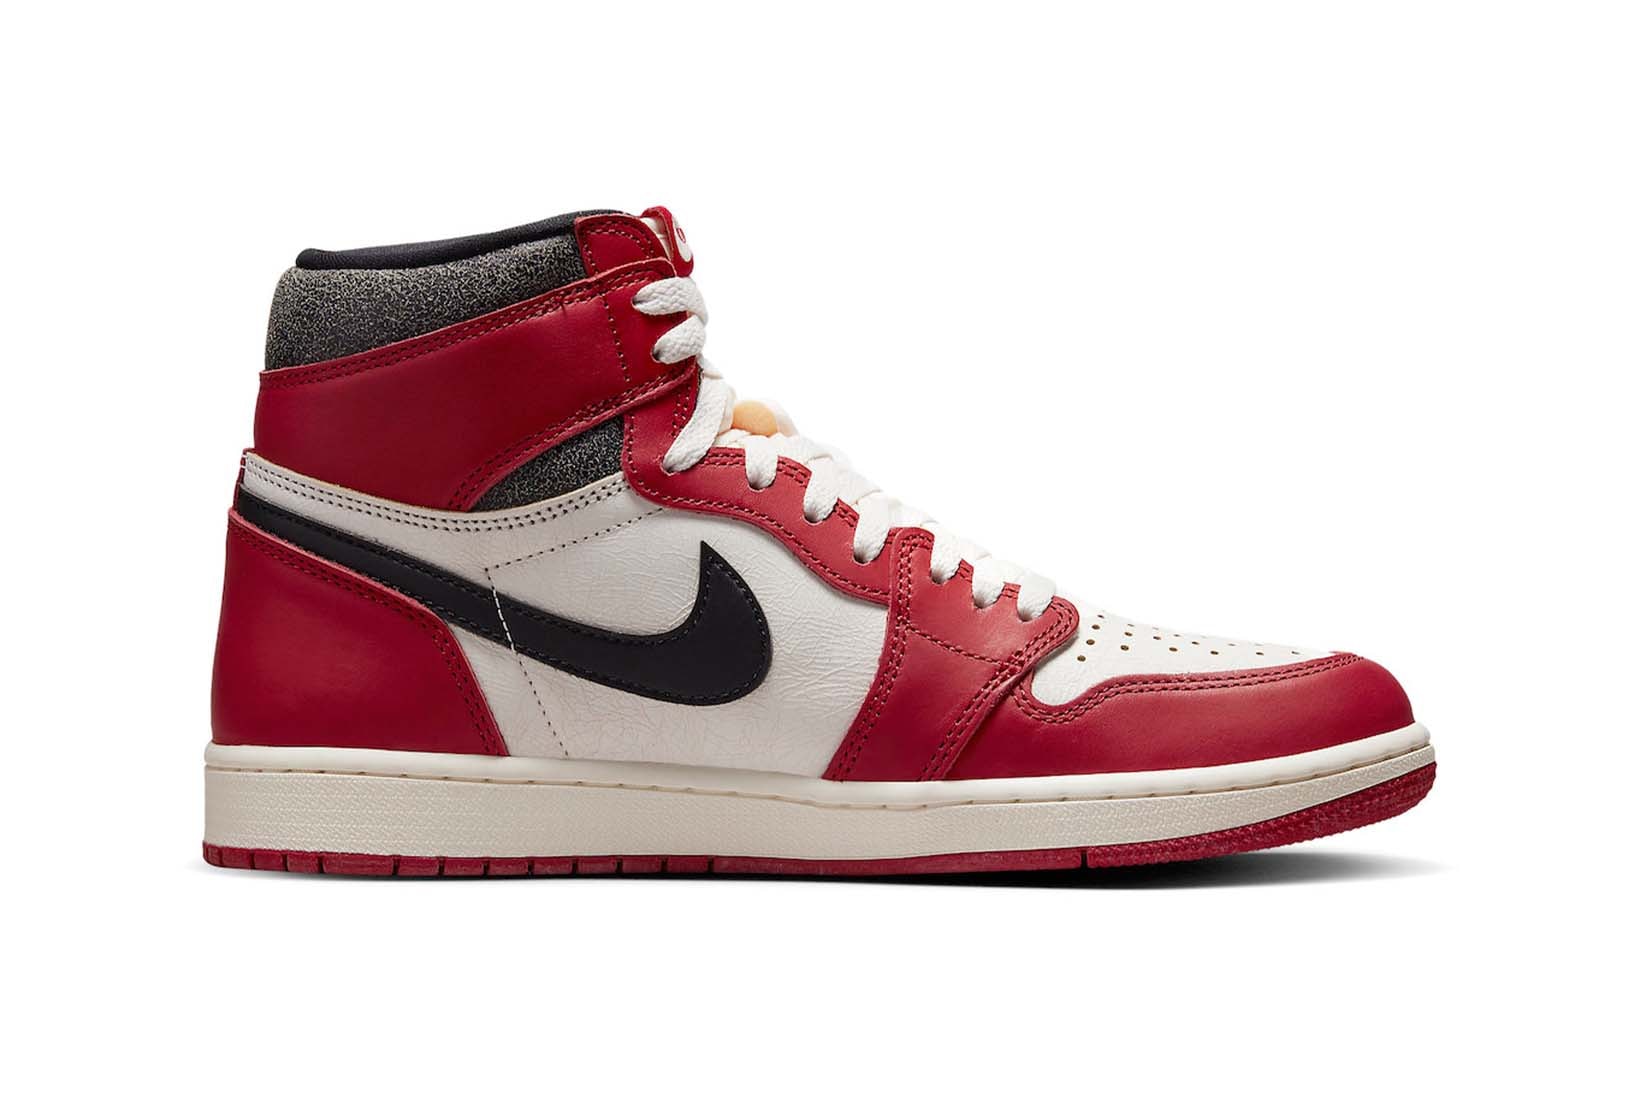 Nike Air Jordan 1 High Lost and Found Chicago Reimagined DZ5485-612 Release Date Price